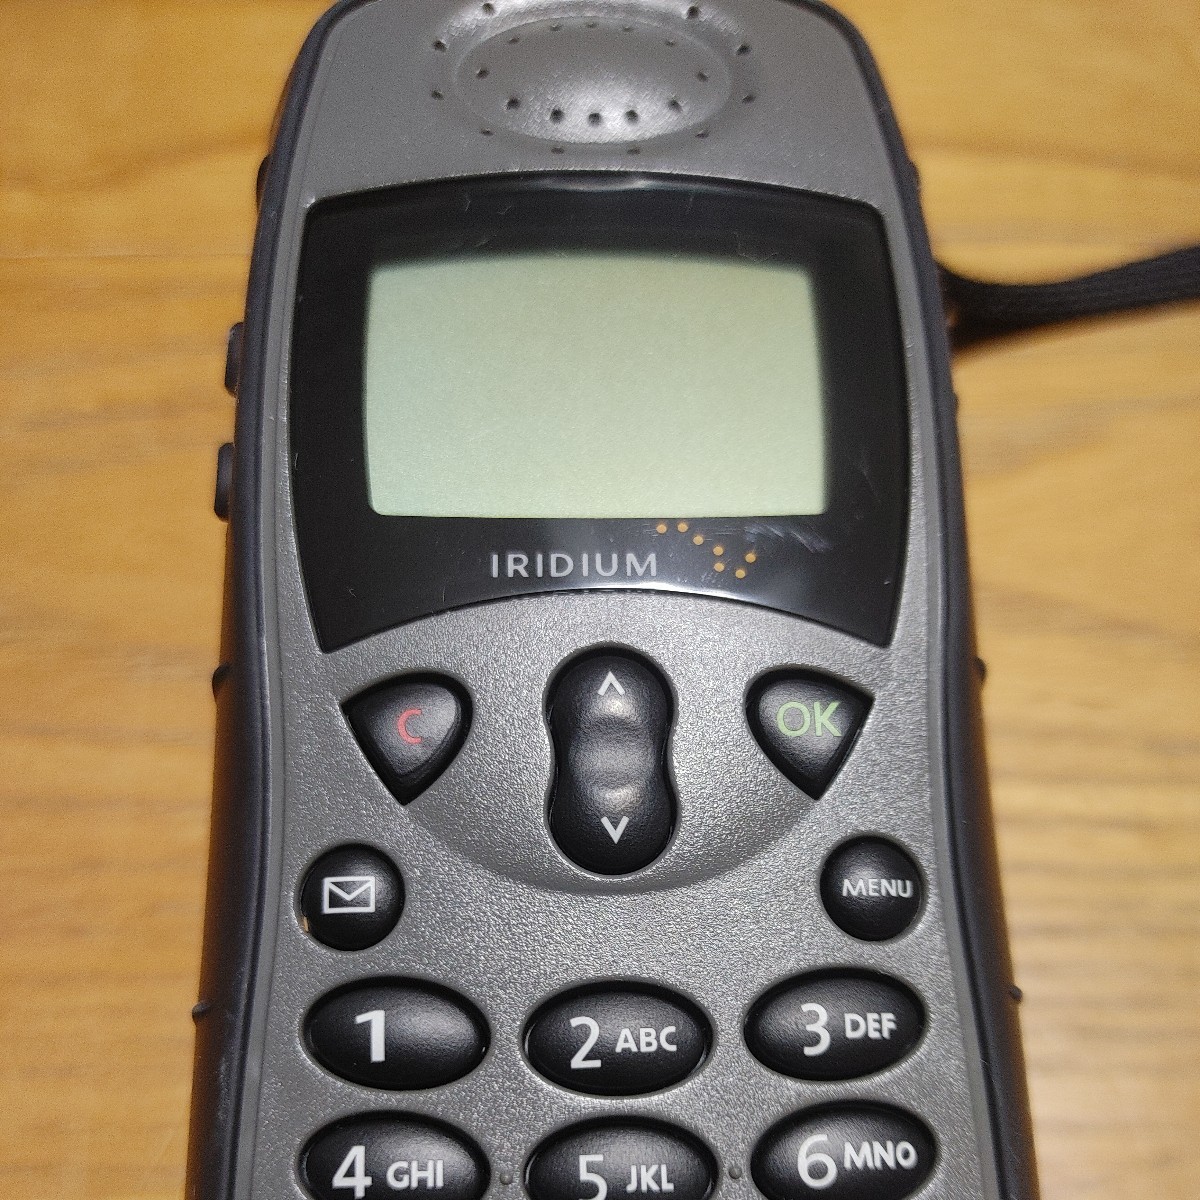 Iridium 9505A world among use is possible only. satellite mobile telephone 